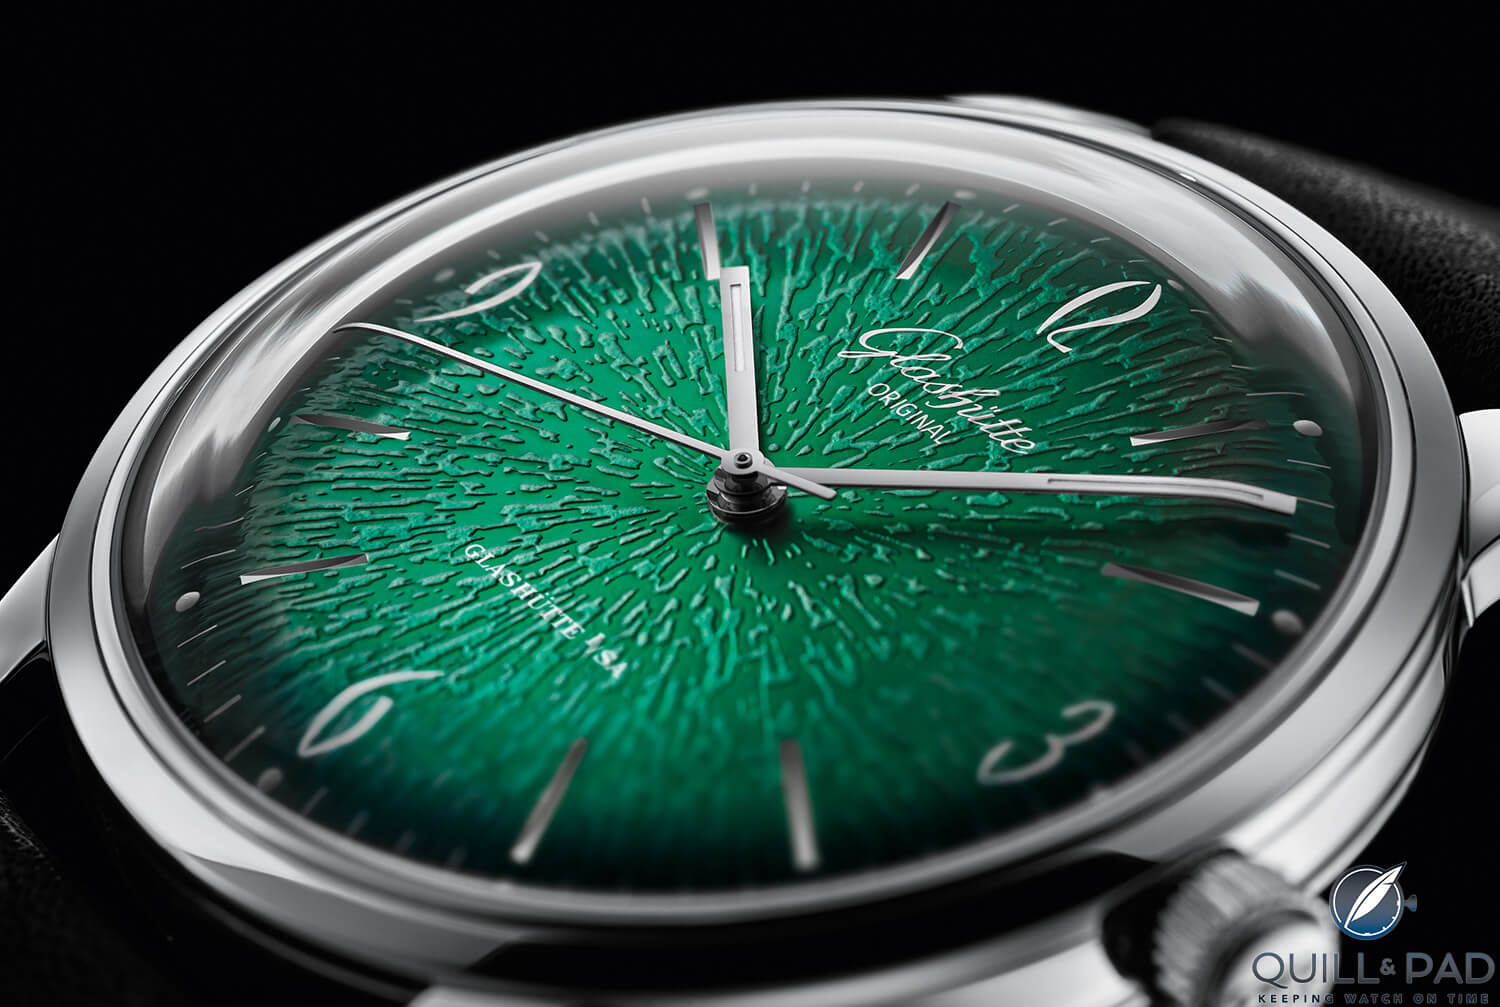 Close up look at the dial of the Glashütte Original Sixties Green